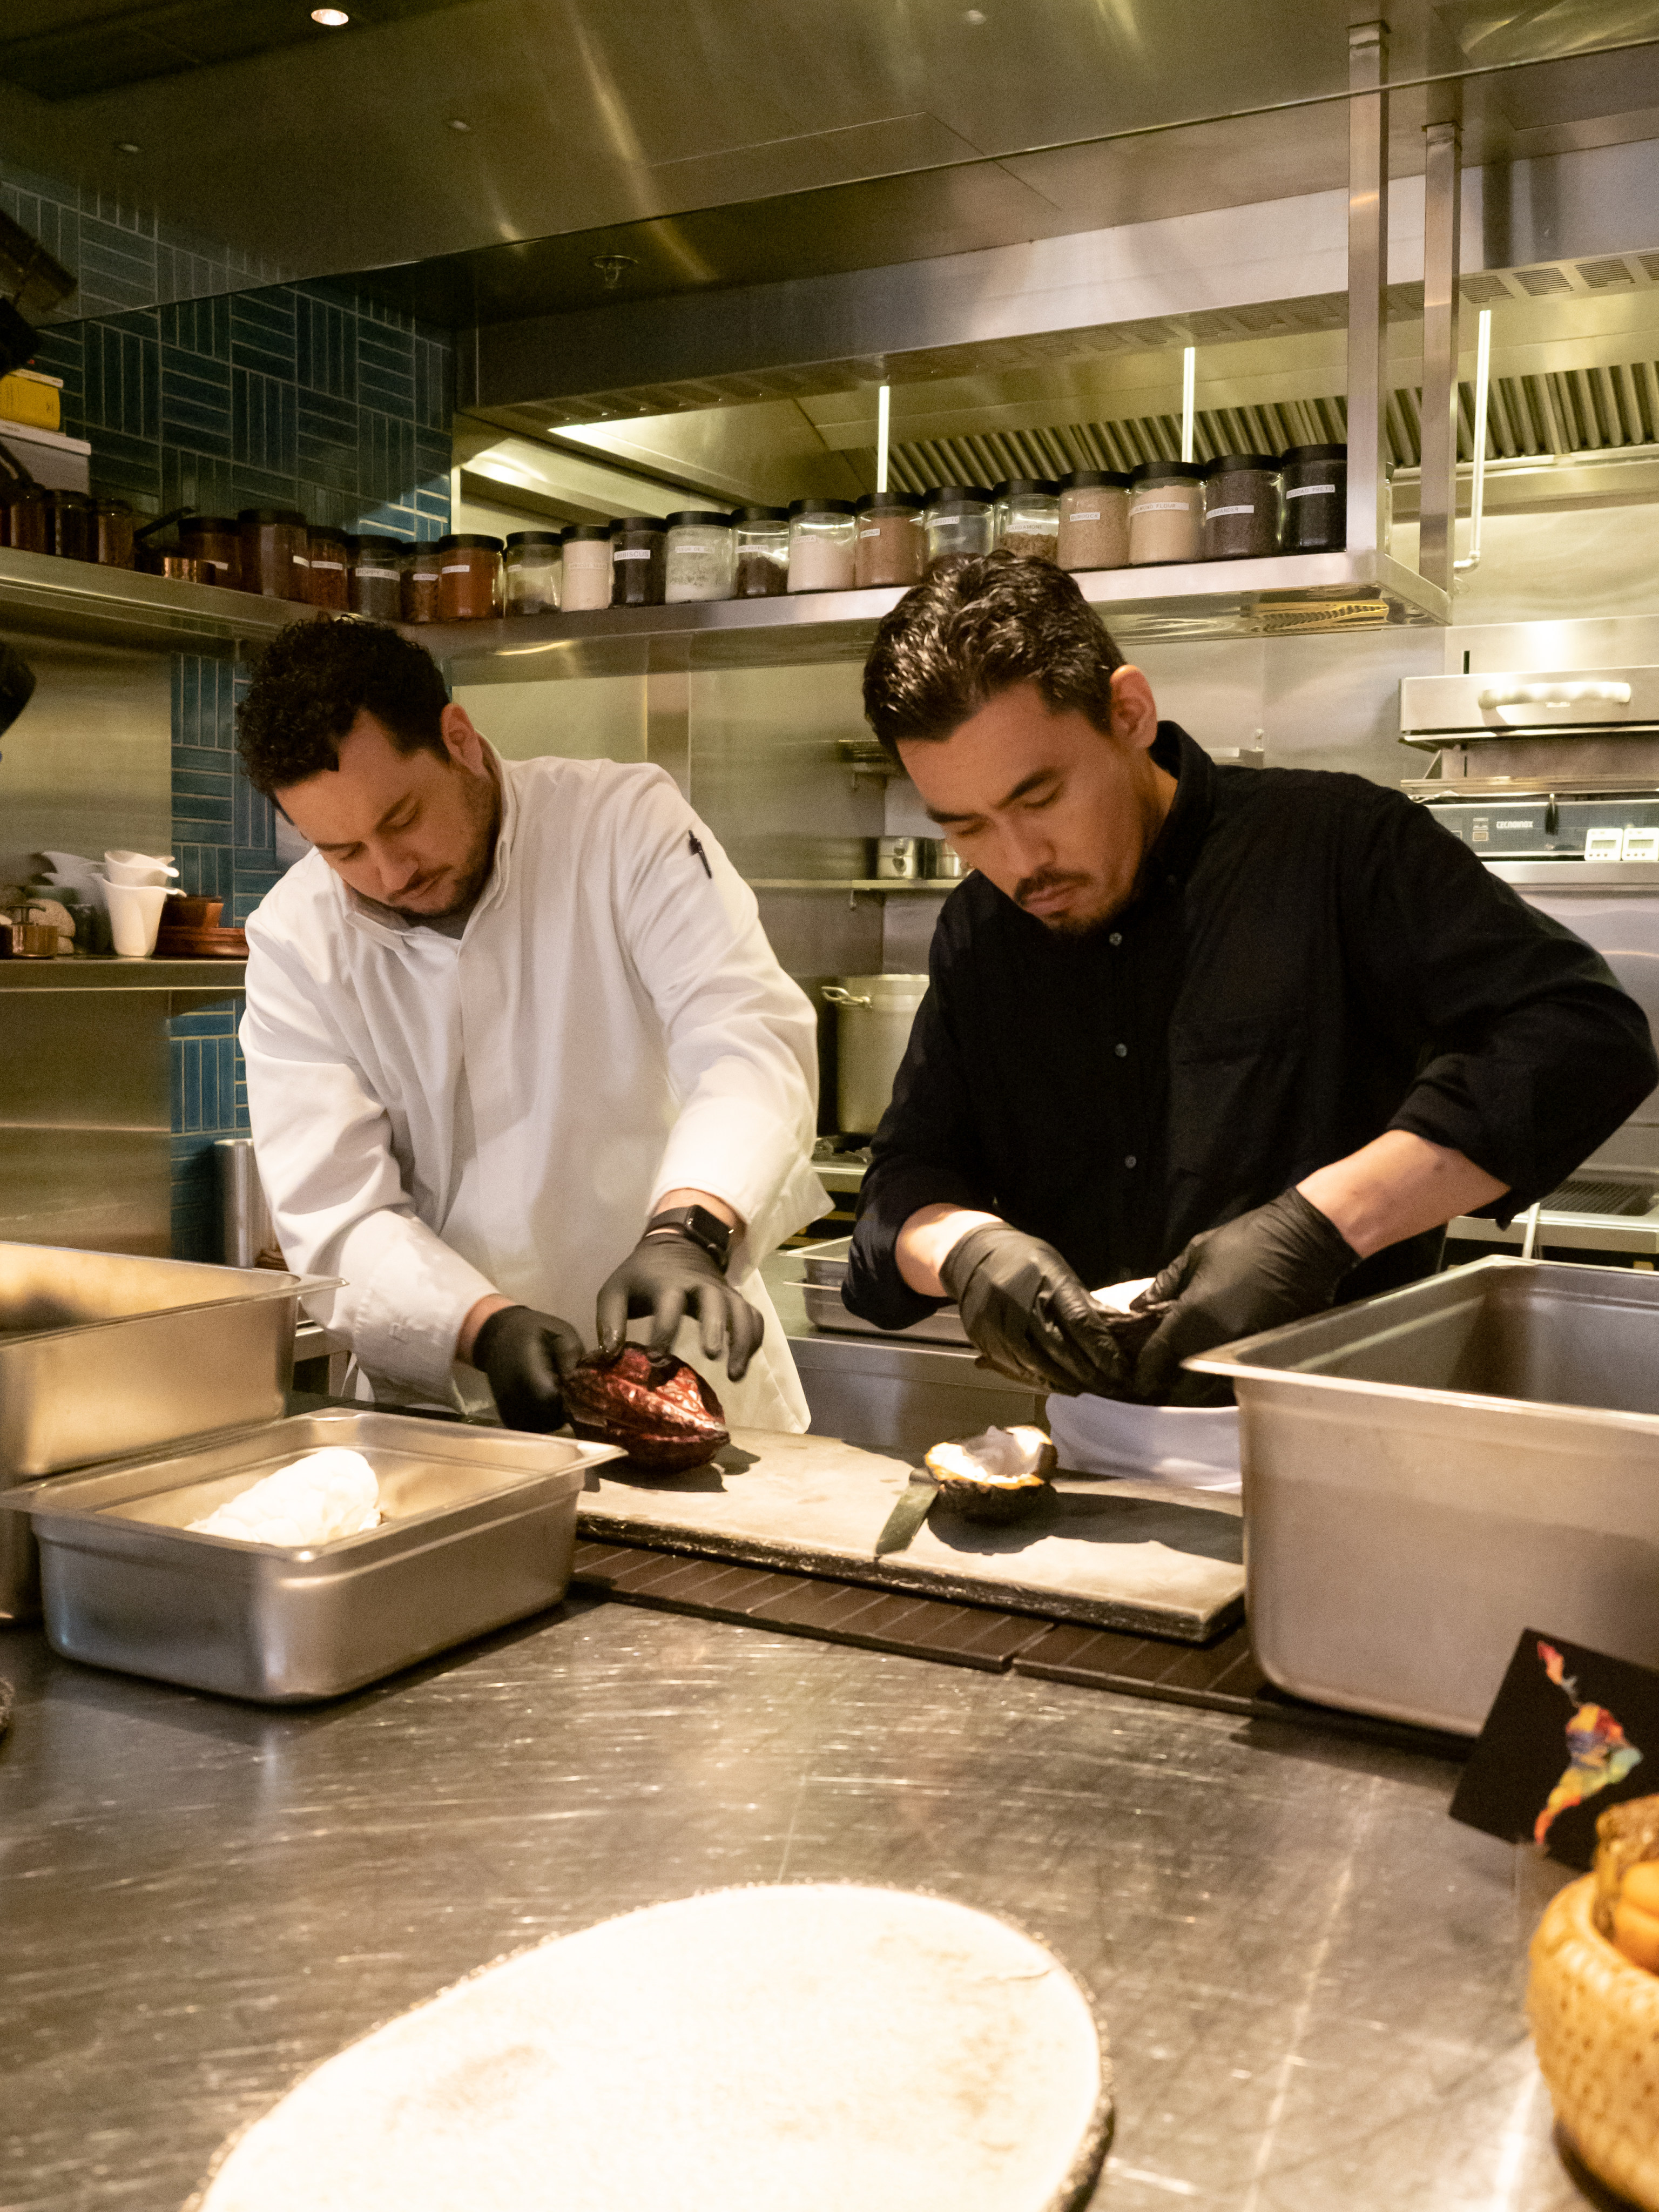 Chefs Ricardo Chaneton and Hideaki Sato making their own chocolate from scratch. Photo: Discovery